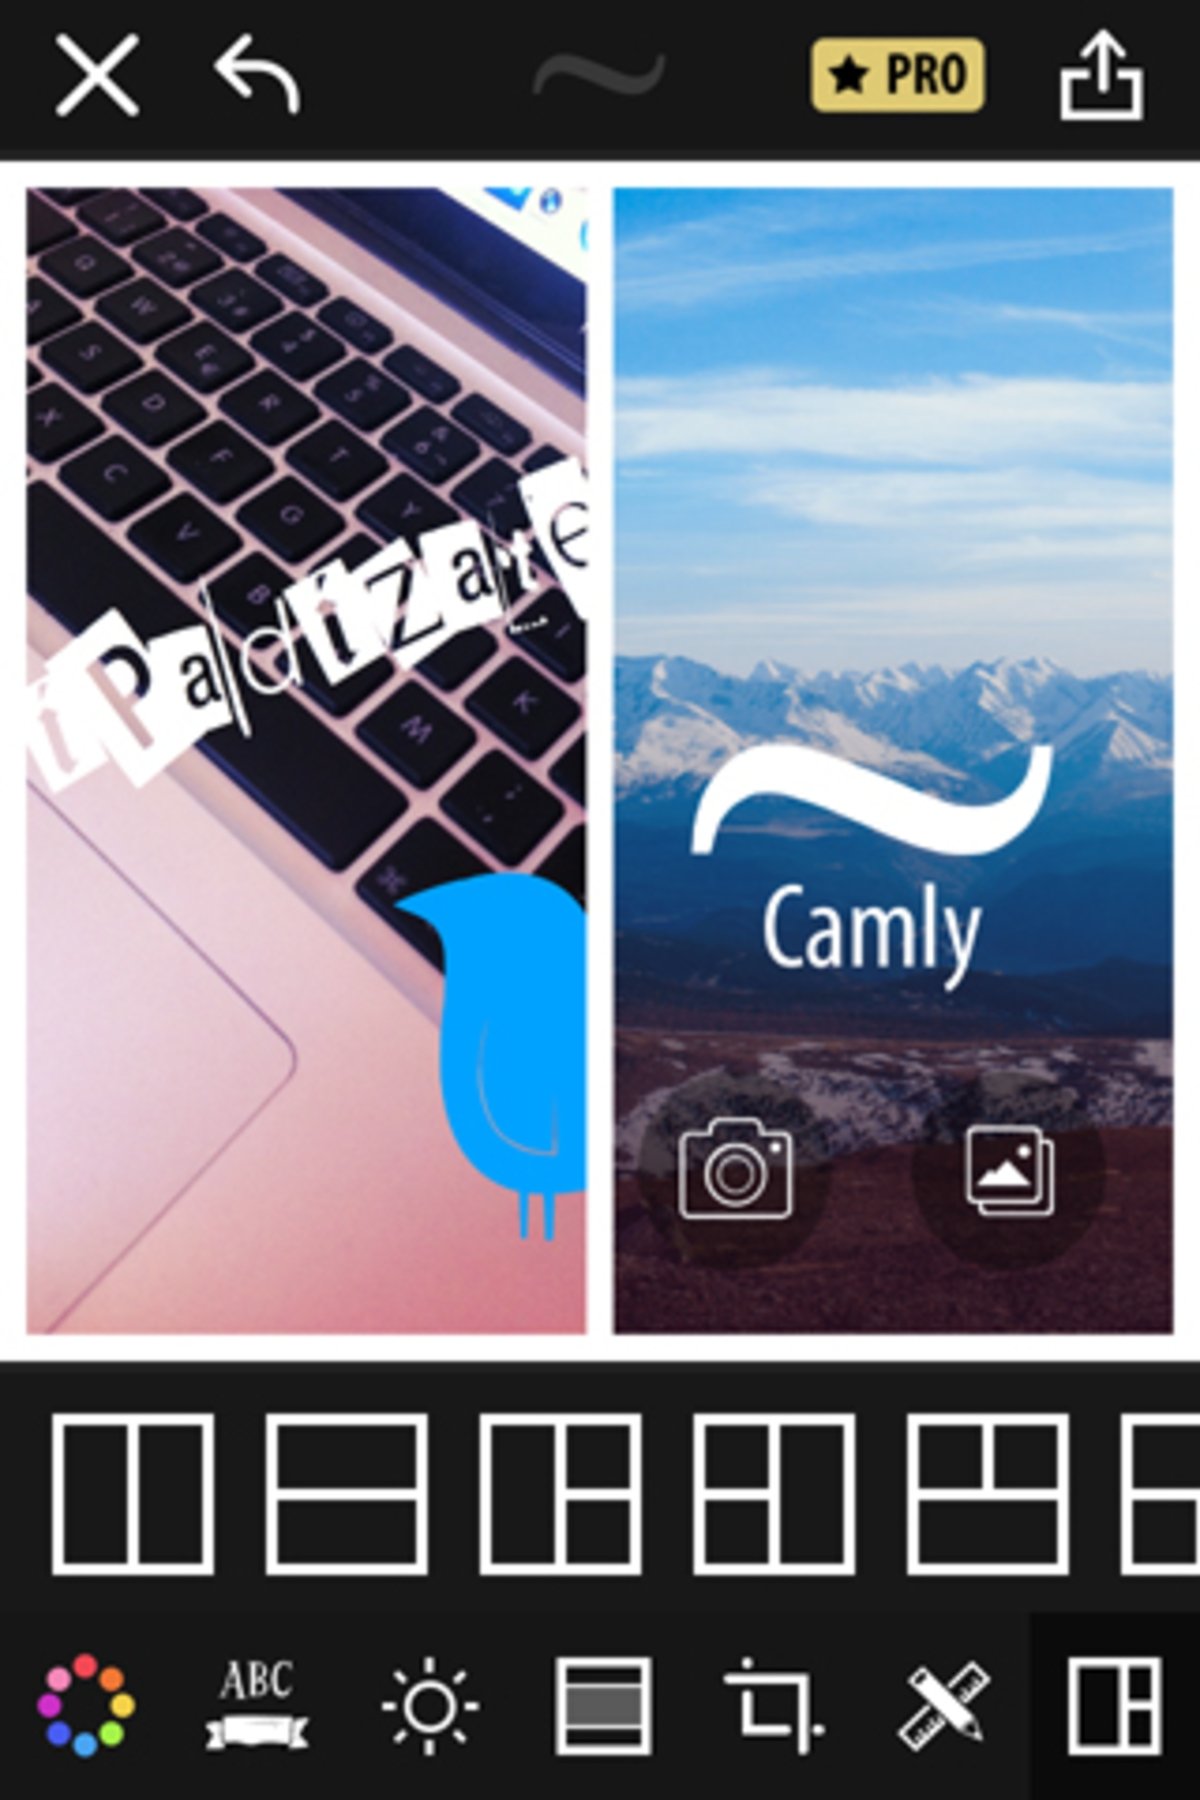 camly-pro-app-review-6